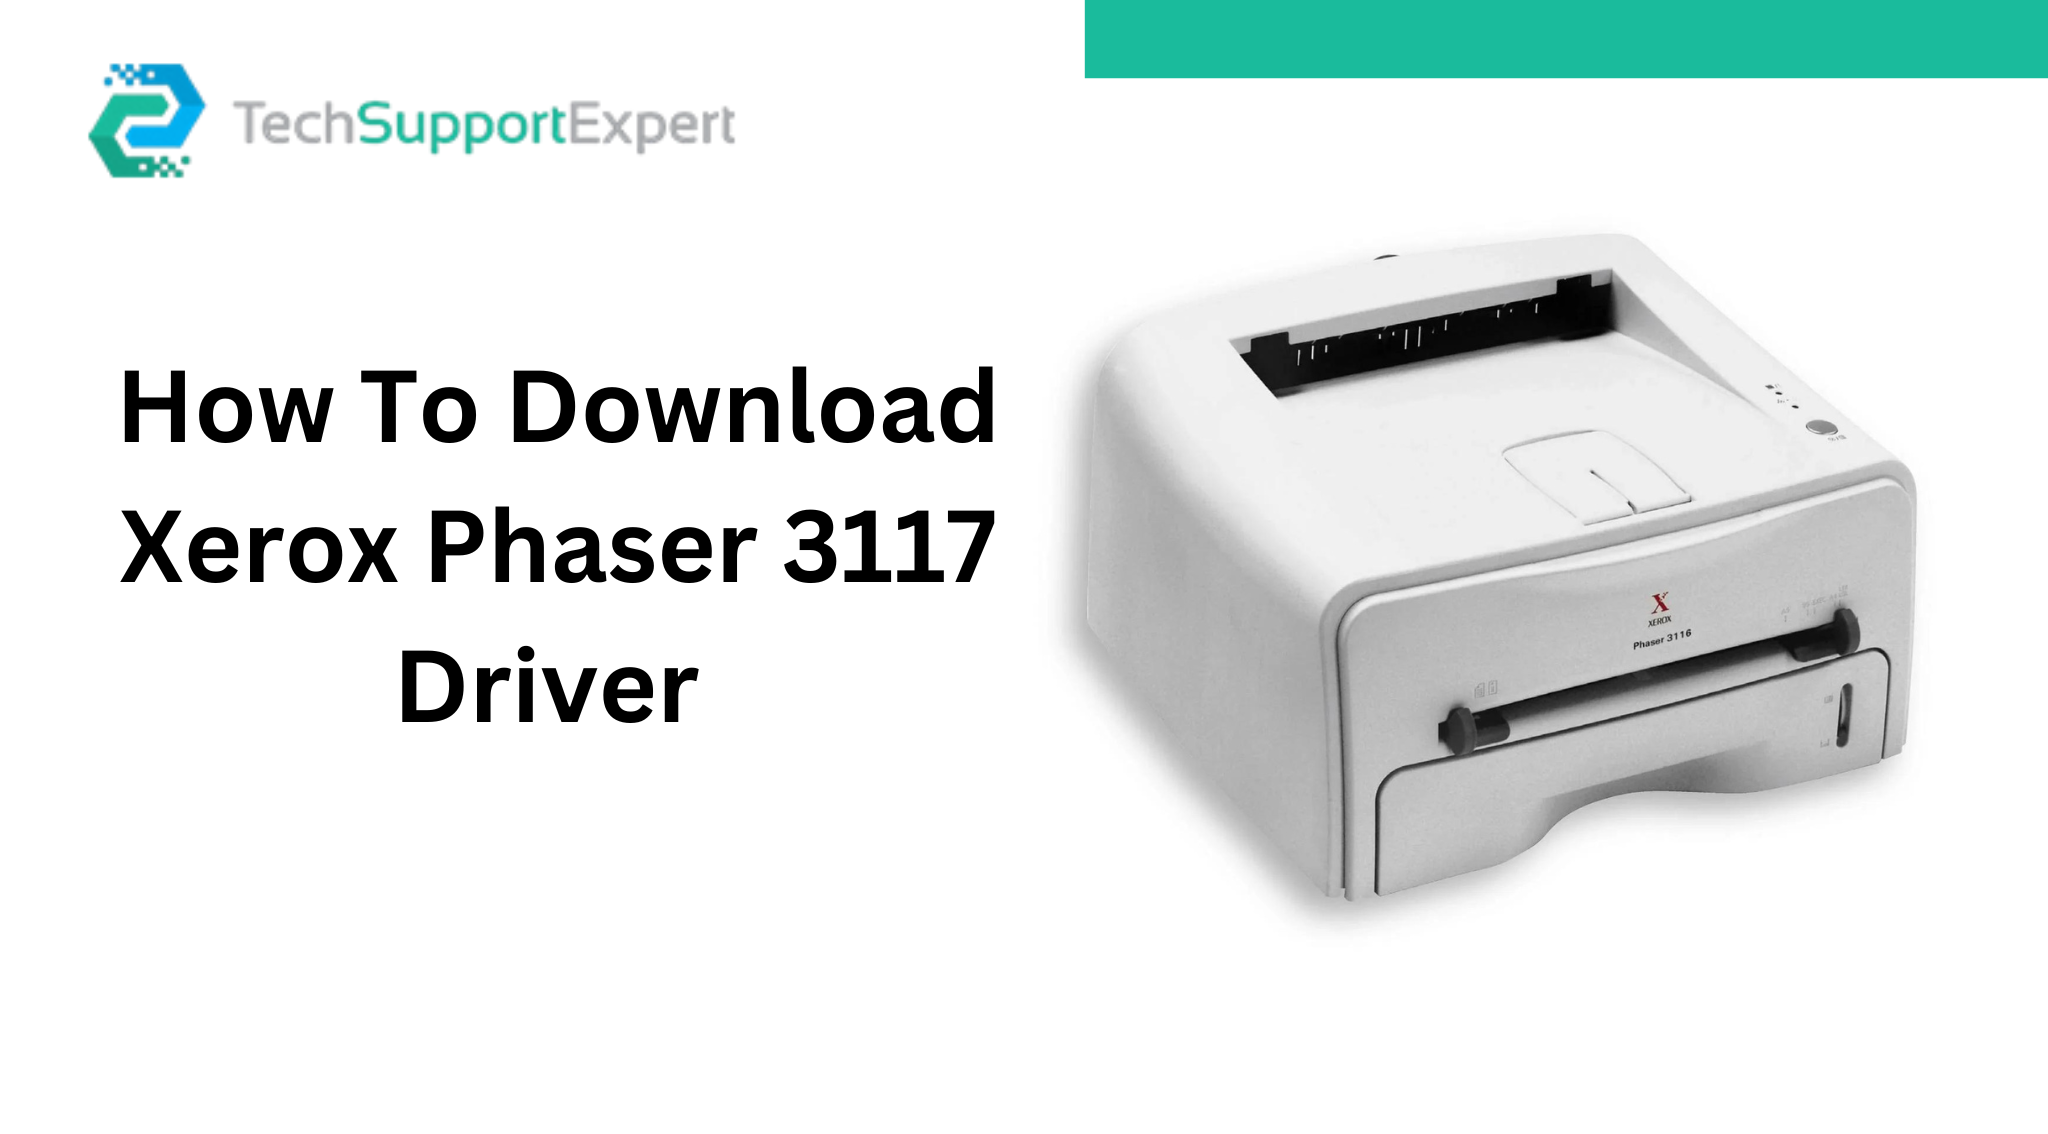 How To Download Xerox Phaser 3117 Driver – A Complete Guide